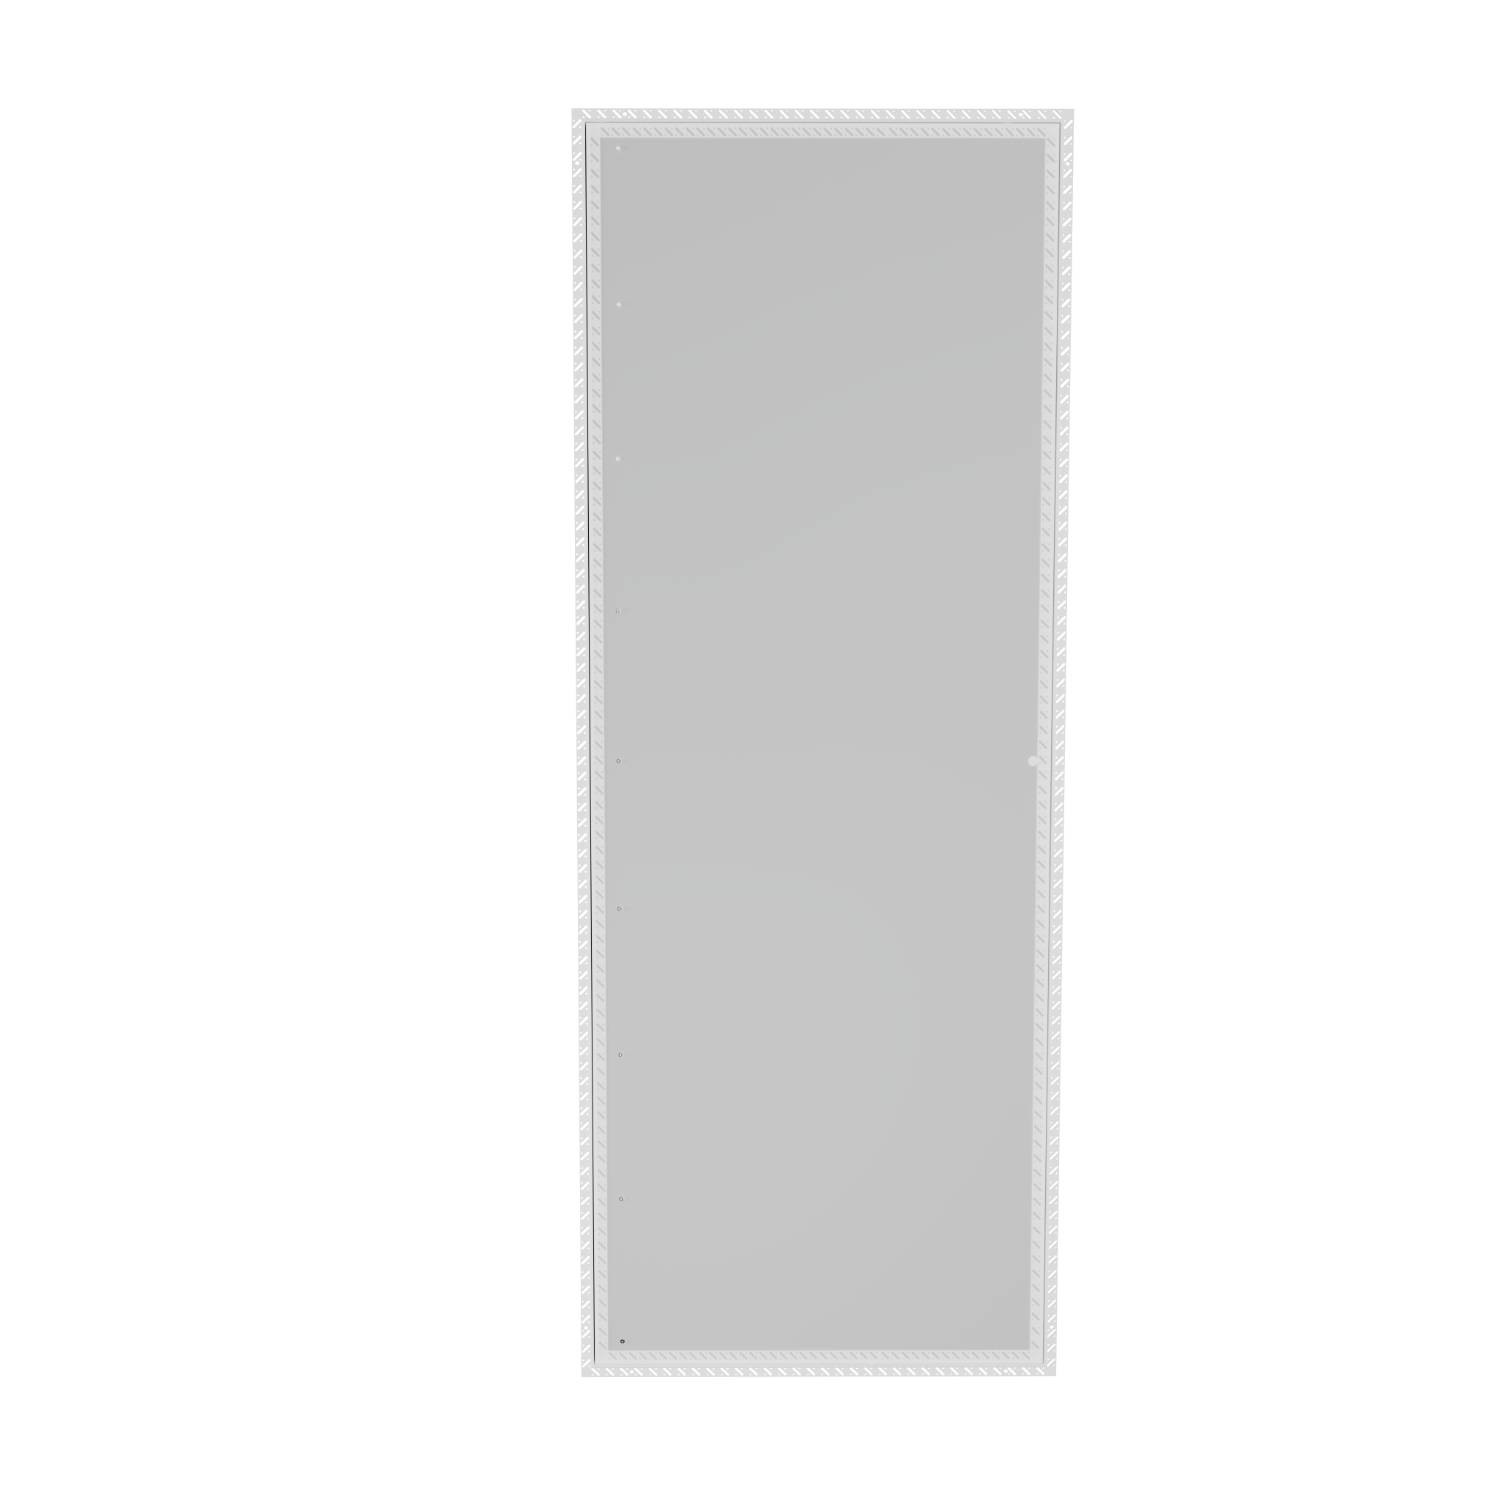 Plasterboard Riser Door (EX53 Range) - Beaded Frame - 2 Hour Fire Rated - Wall Access Panel